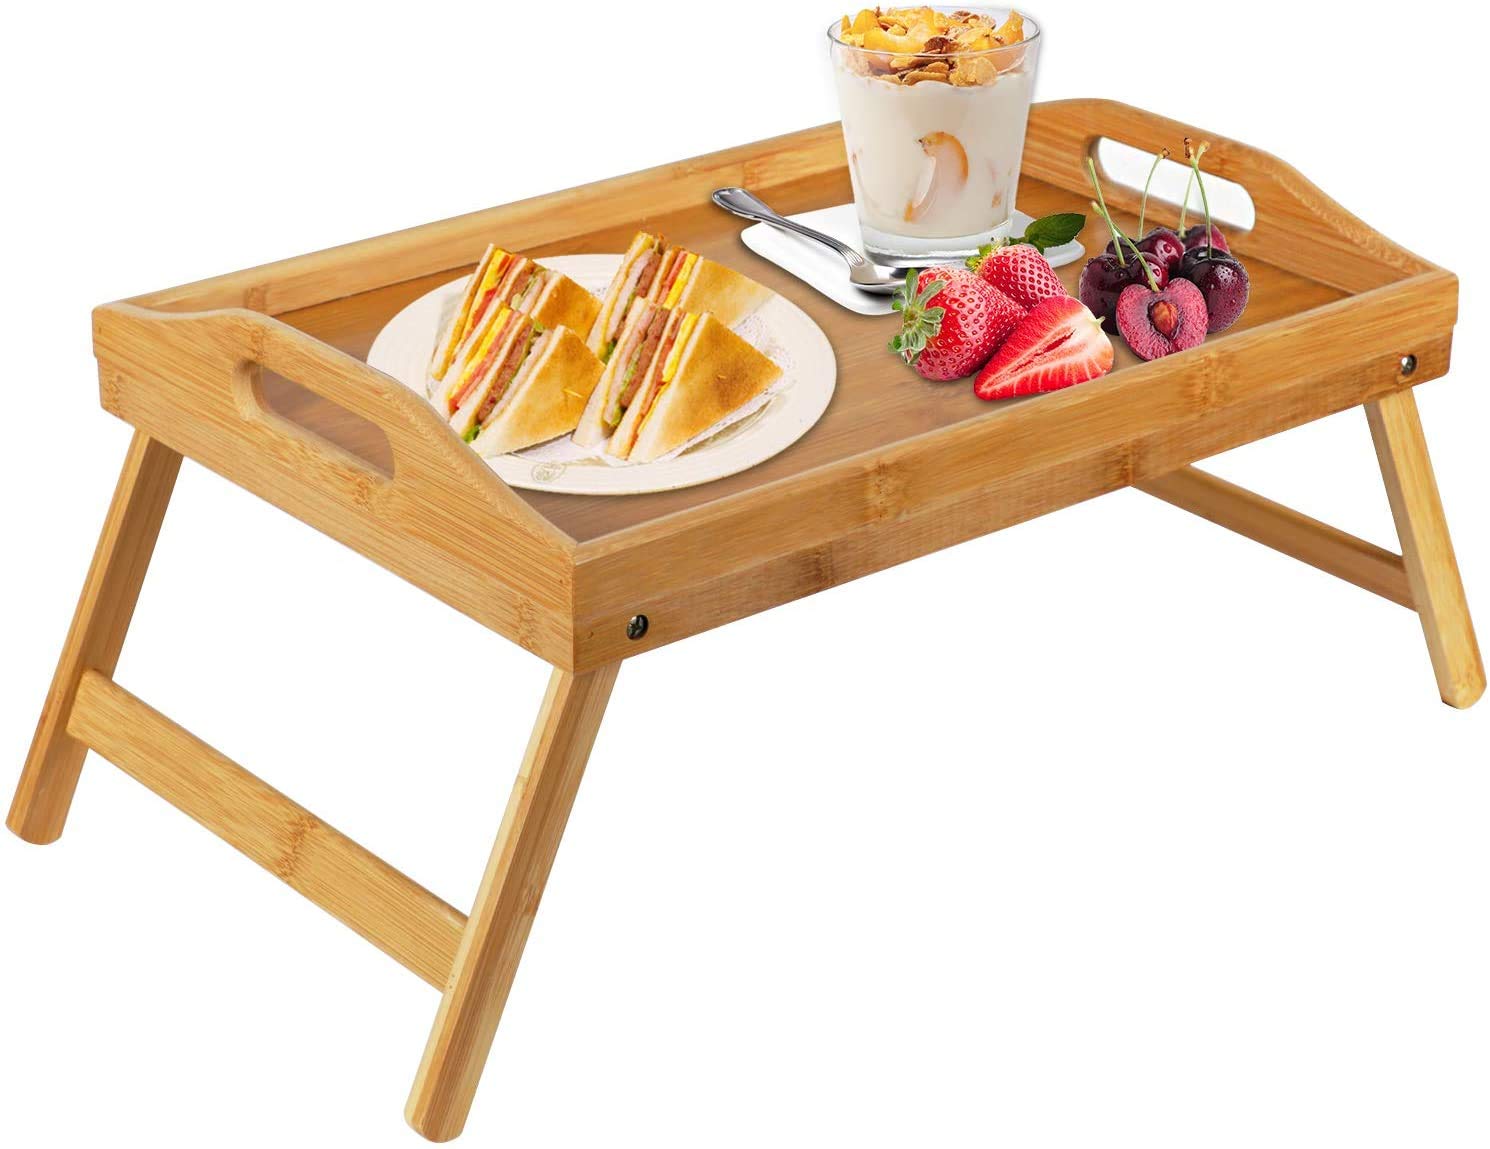 Bamboo Bed Tray Table with Foldable Legs & 5-Piece Bamboo Drawer Organizer Set